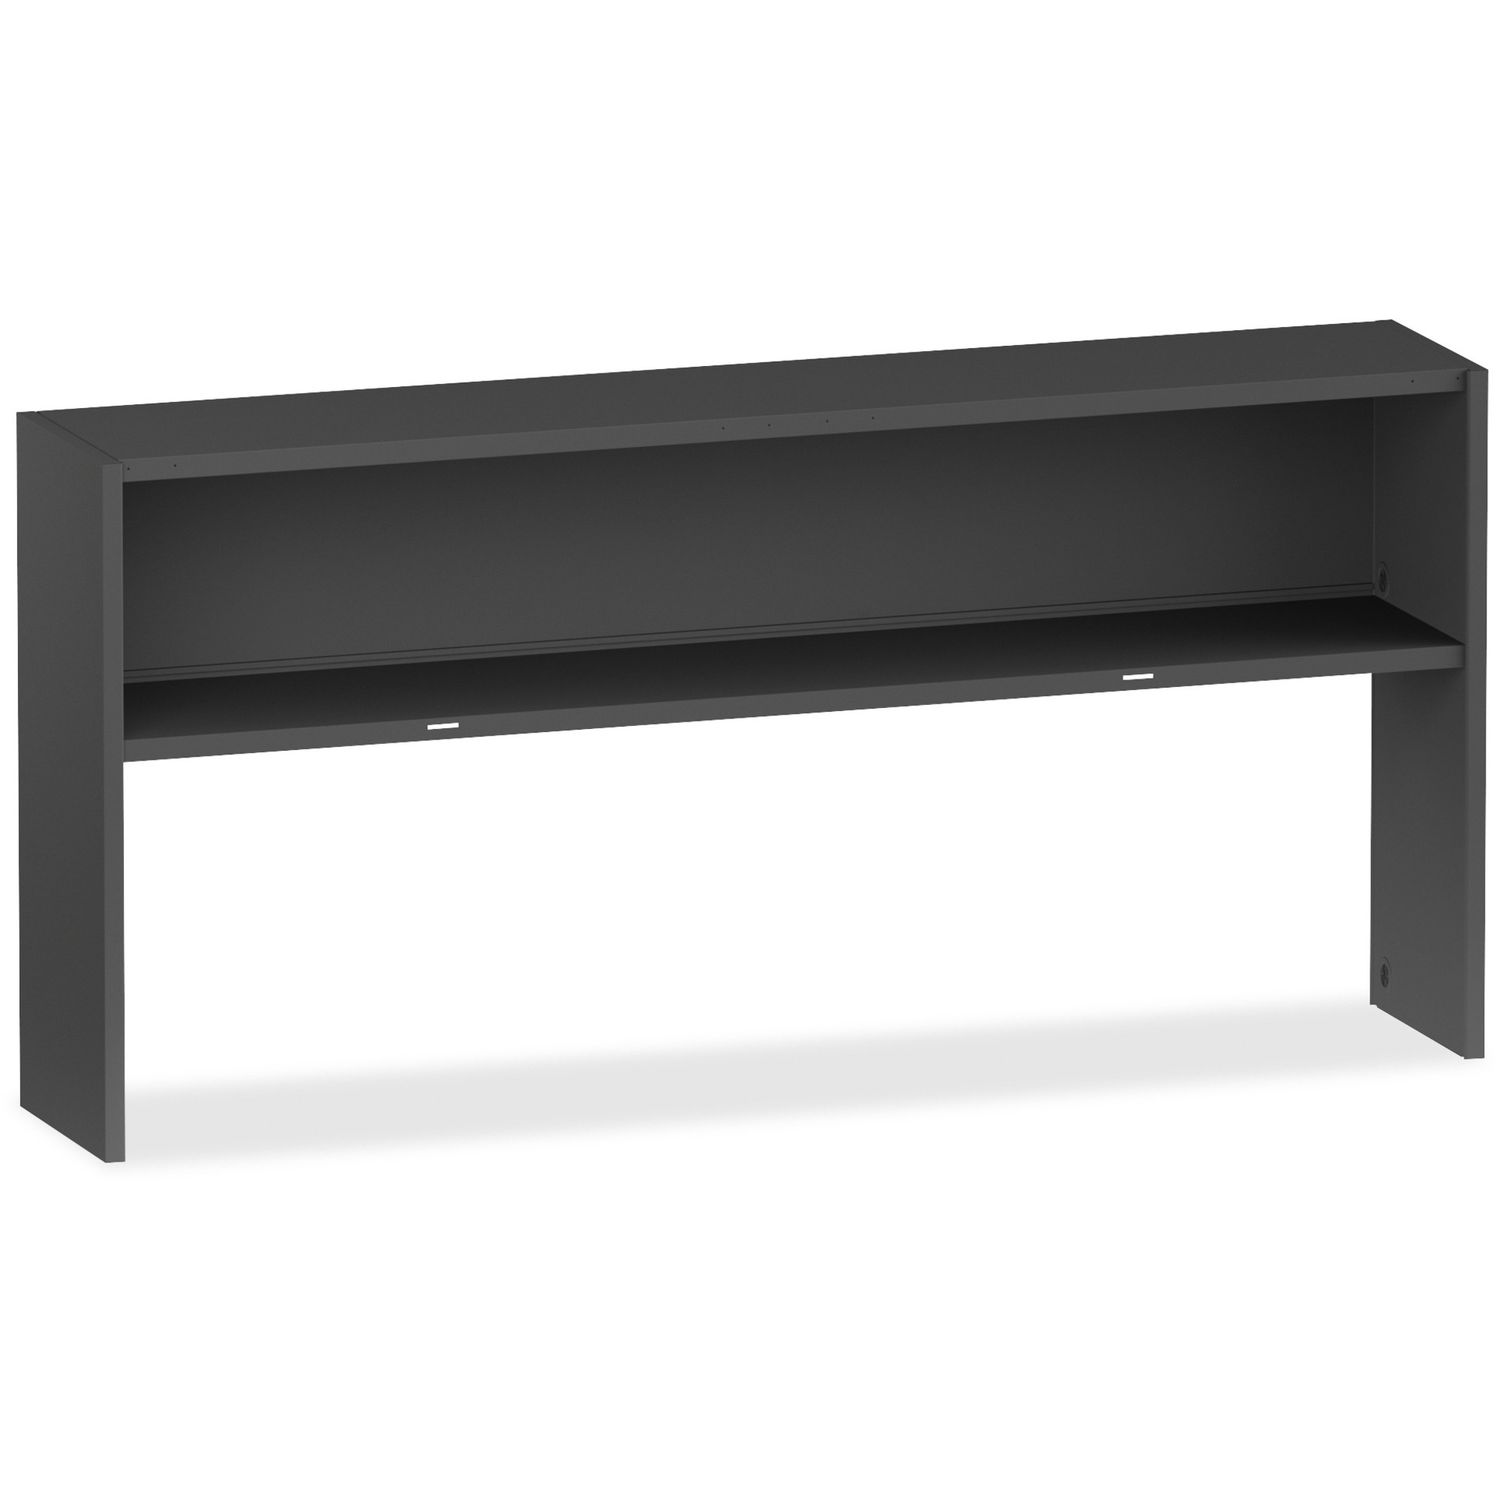 97000 Modular Desking Charcoal Stack-on Hutch 72" x 13" x 36", Material: Steel, Finish: Charcoal